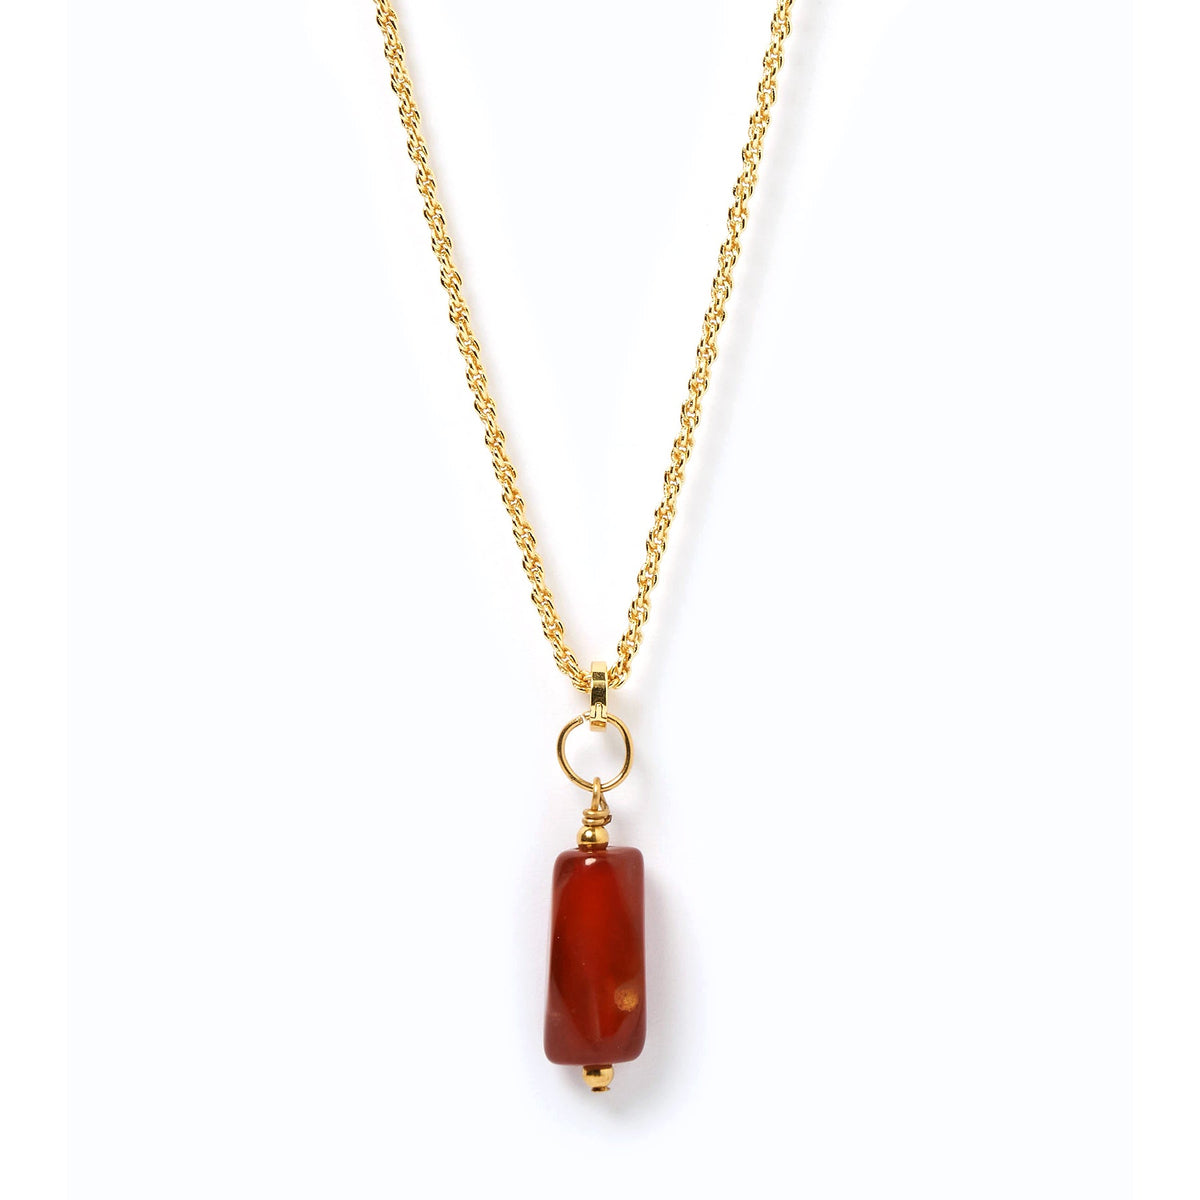 Arms of Eve Chacha Crystal Pendant Necklace - Red Agate